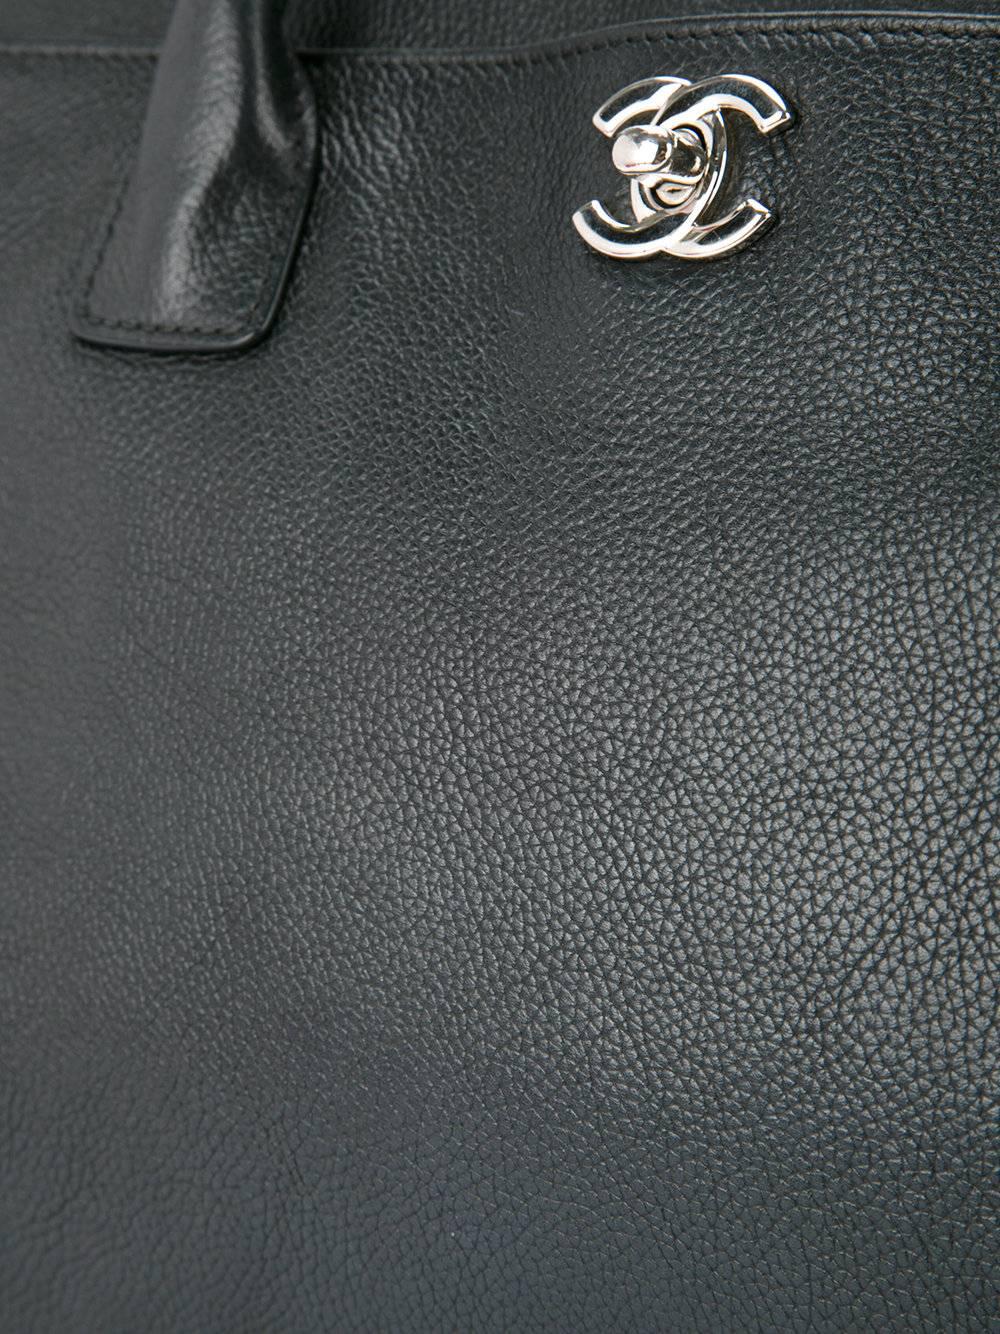 Chanel Black Leather Top Handle Carryall Travel Tote Bag In Excellent Condition In Chicago, IL